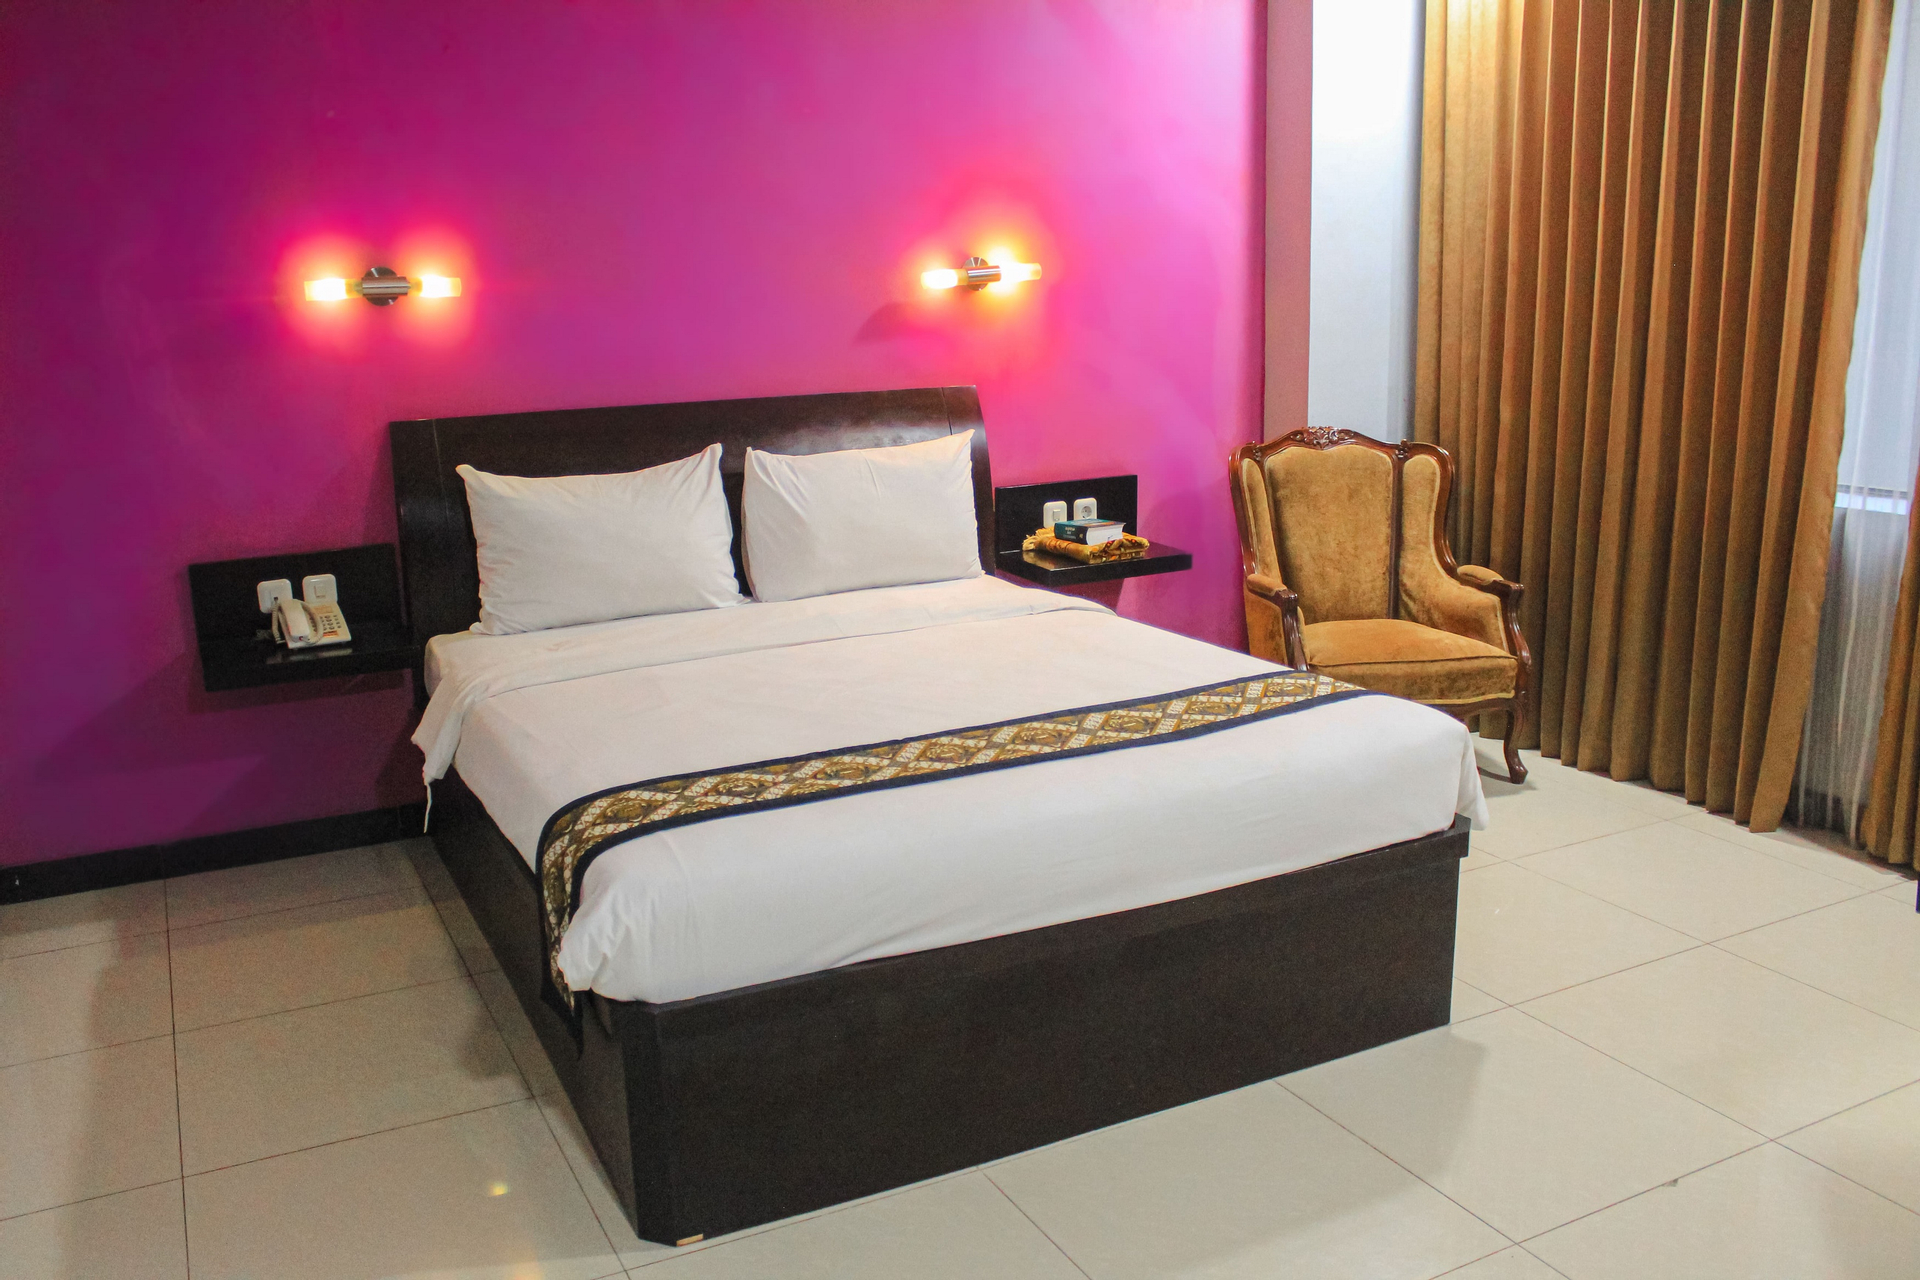 Bedroom 4, Riez Palace Hotel, Tegal